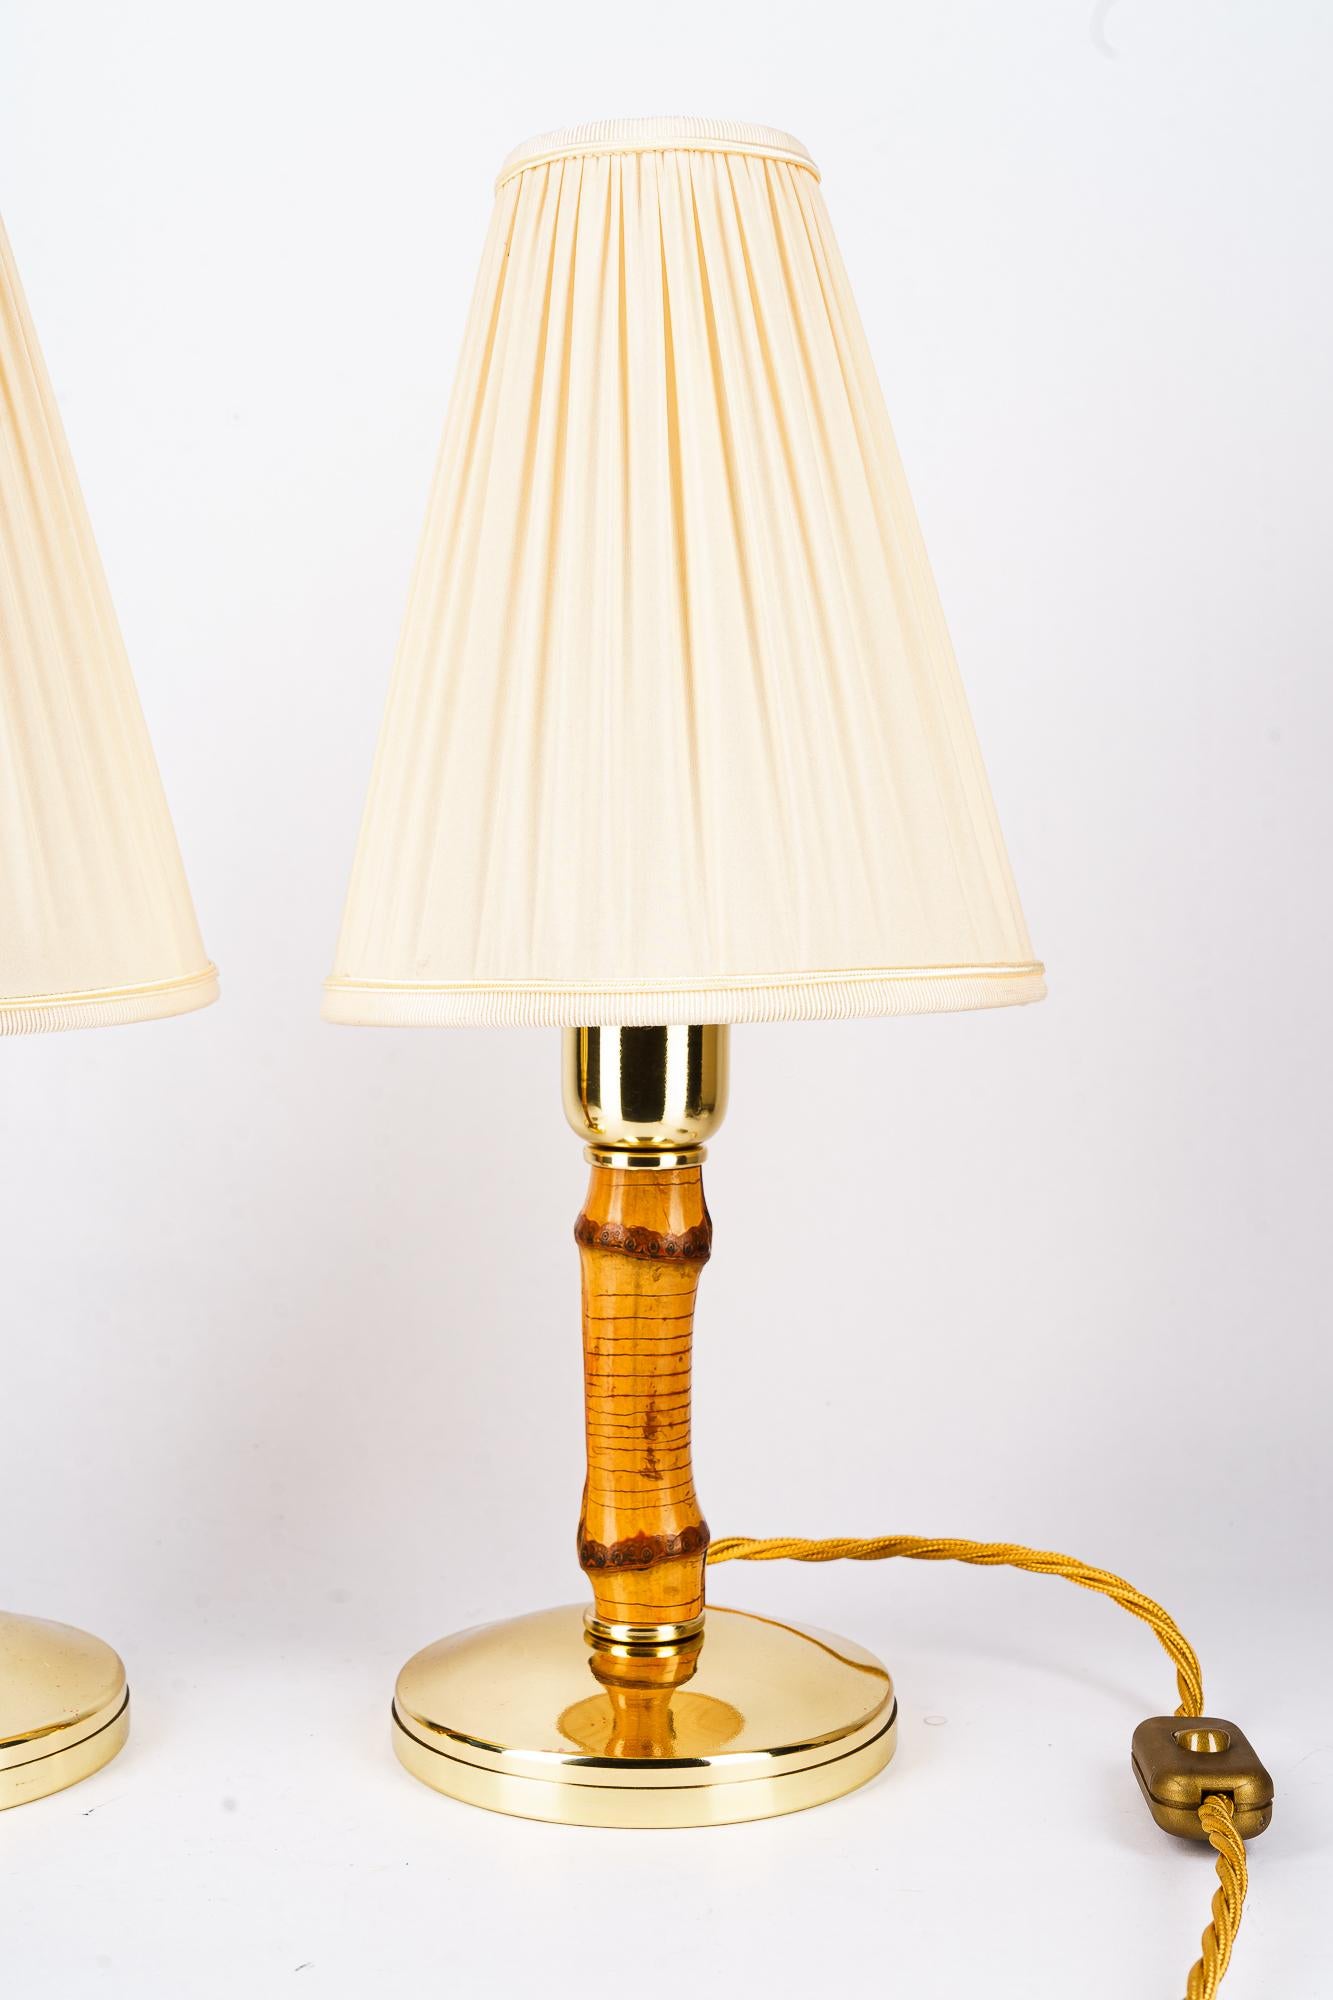 Lacquered 2 Rupert Nikoll Bamboo Table Lamps with Fabric Shades Austria Around 1950s For Sale